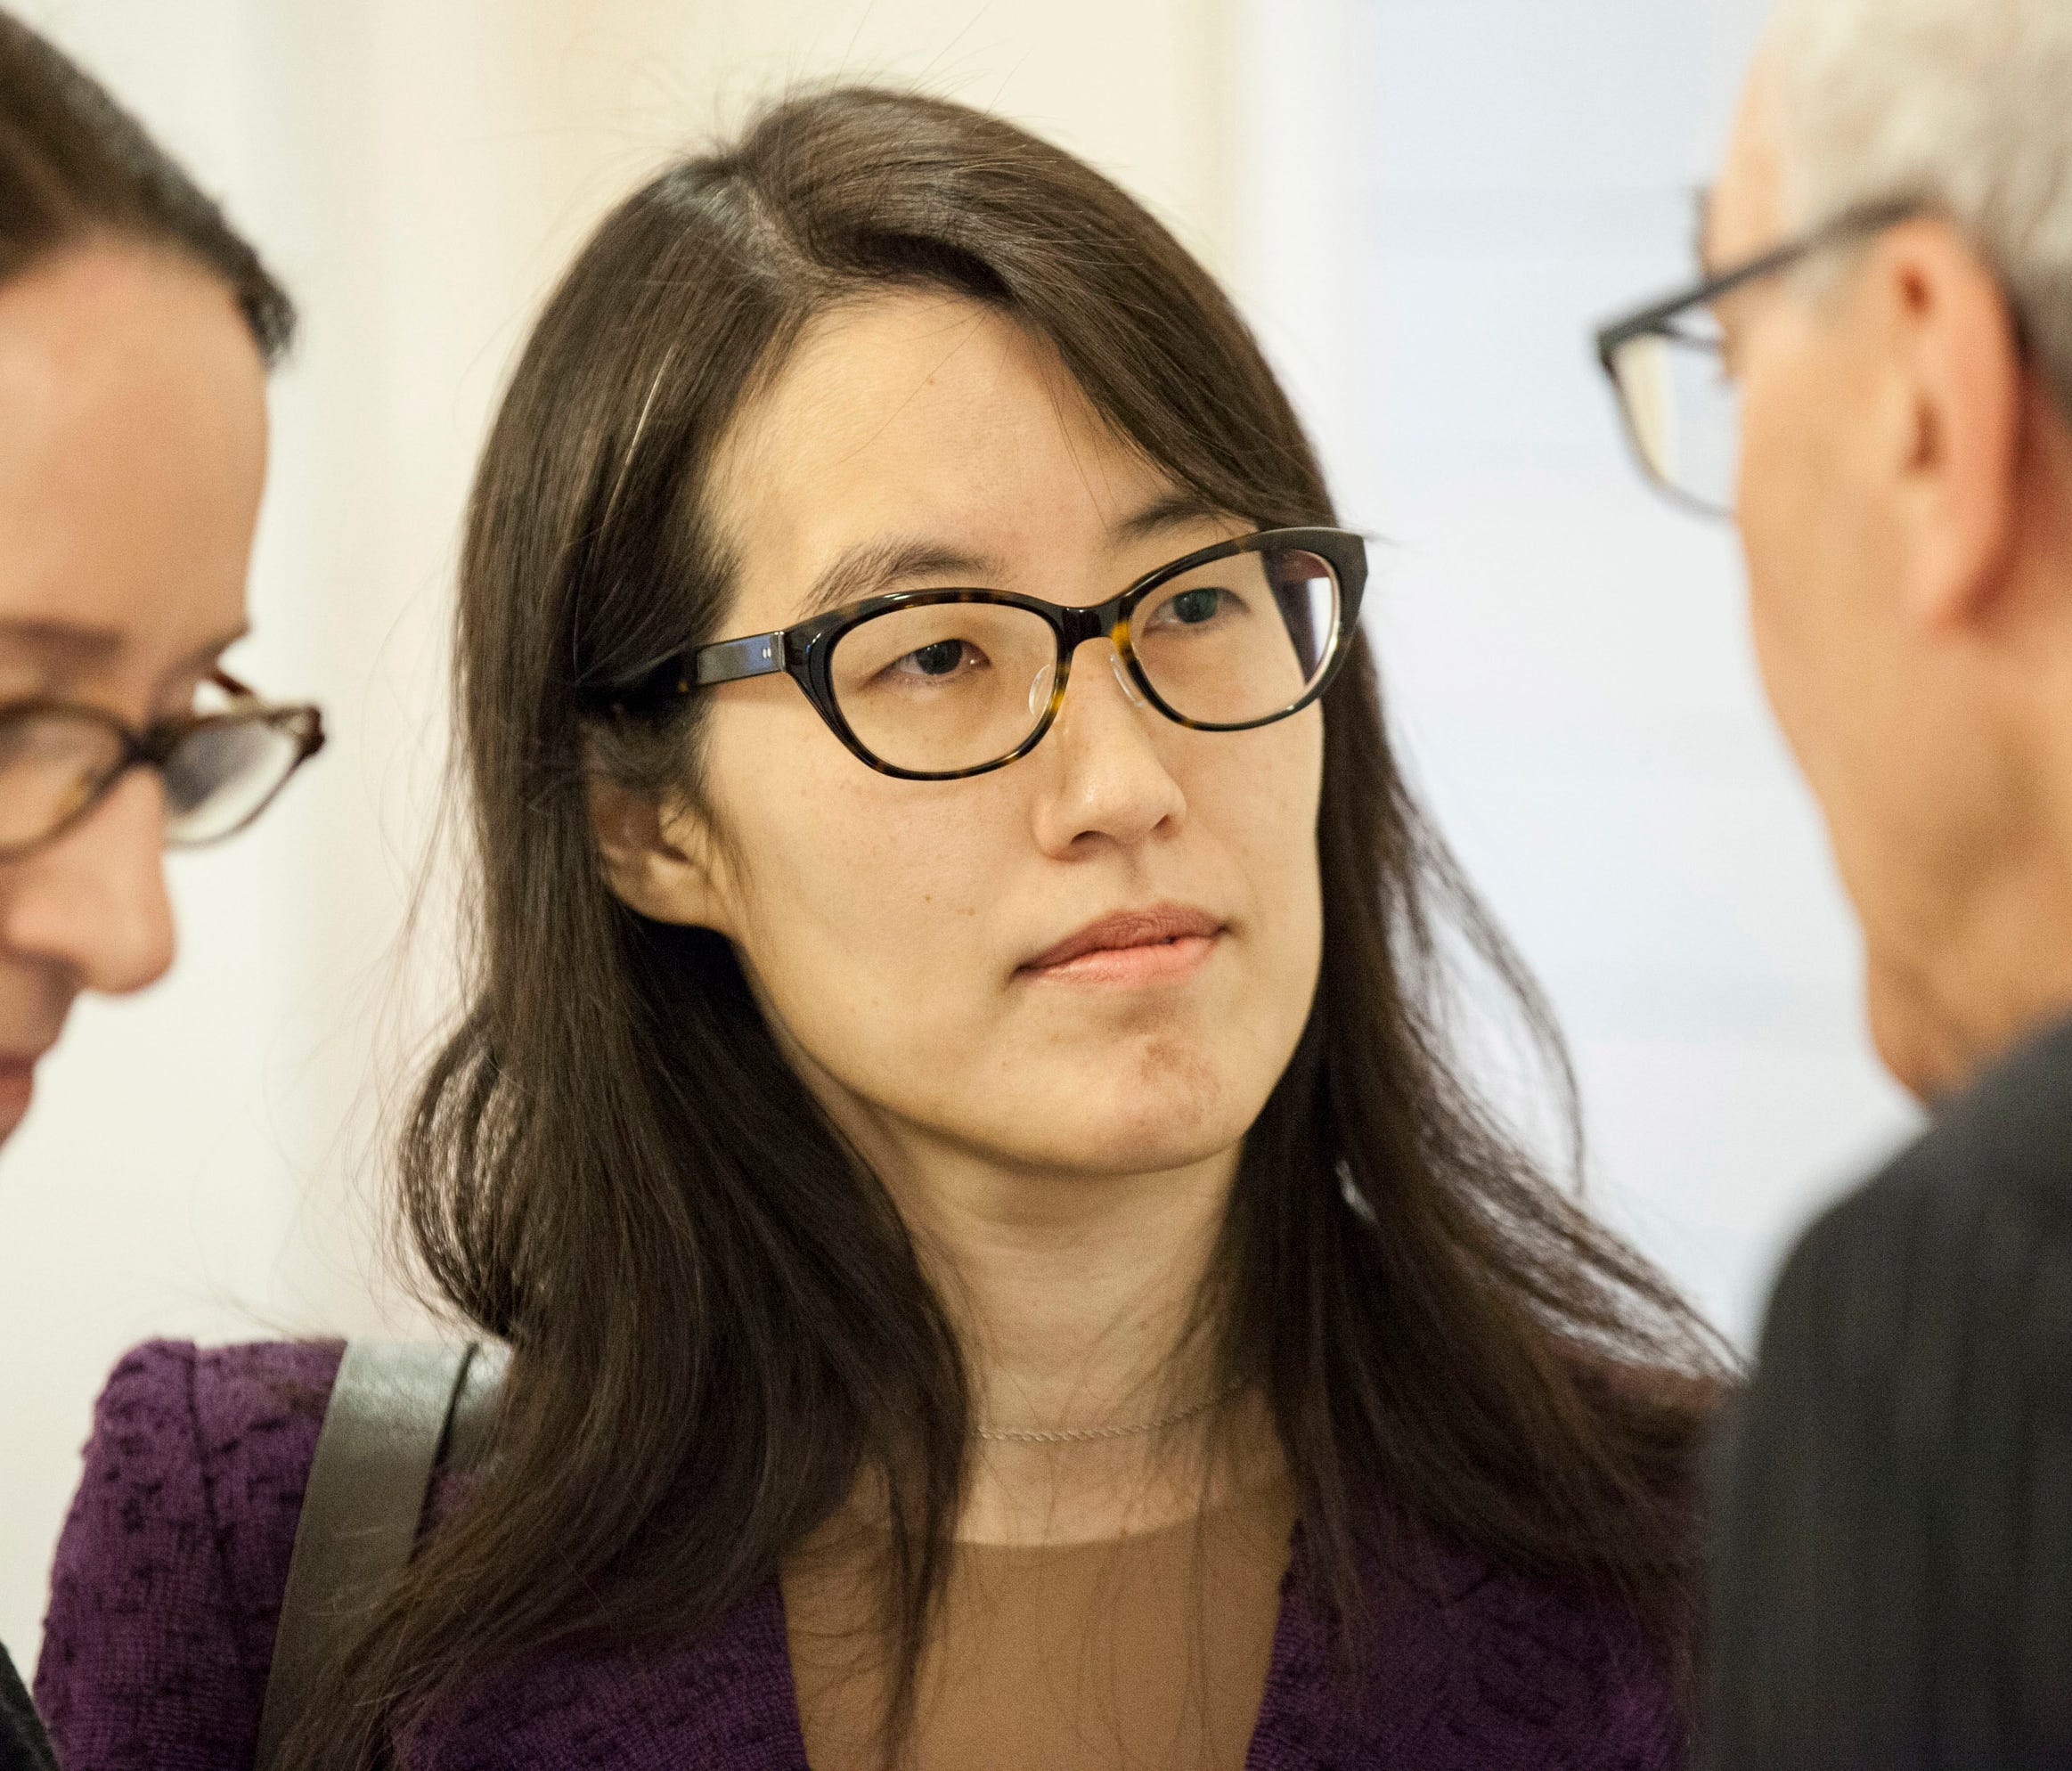 Ellen Pao, seen here talking with attorneys Therese Lawless and Alan Exelrod at the San Francisco Civic Center Courthouse following a court appearance in 2015, is one of the Asian American women who has led the push for greater diversity in the techn